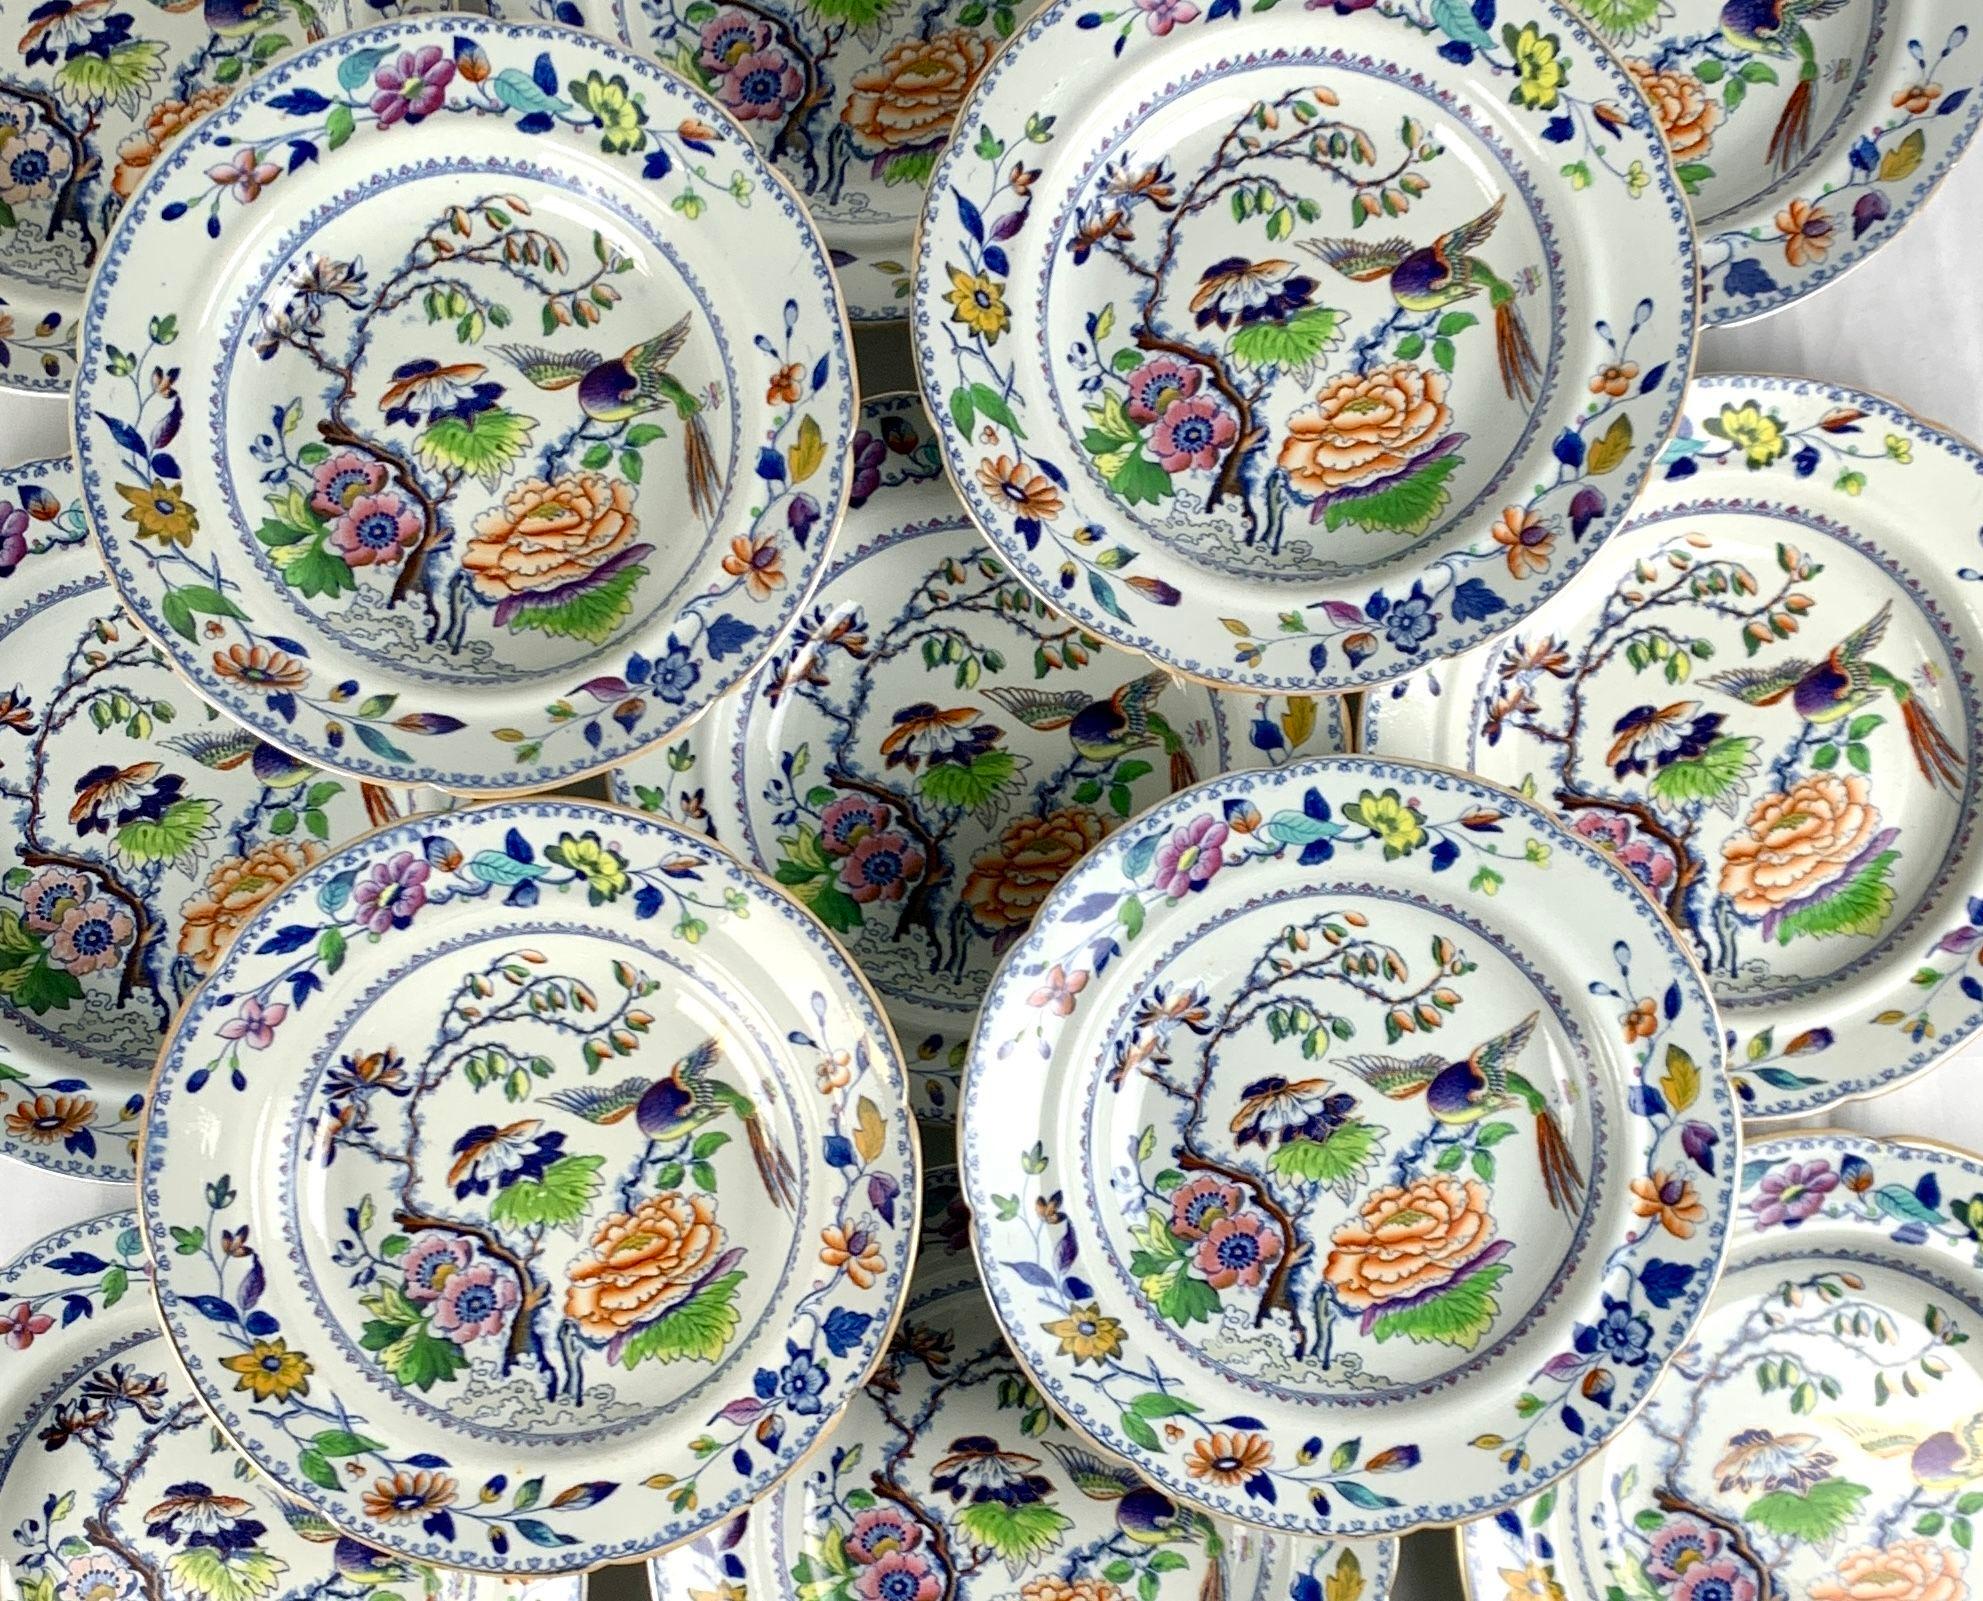 This set of fifteen Flying Bird soup or pasta dishes has everything you want in a colorful pattern: a beautiful bird and flowers painted rainbow colors.
The colors are an unexpected combination of purple, pink, yellow, orange, deep cobalt blue, and